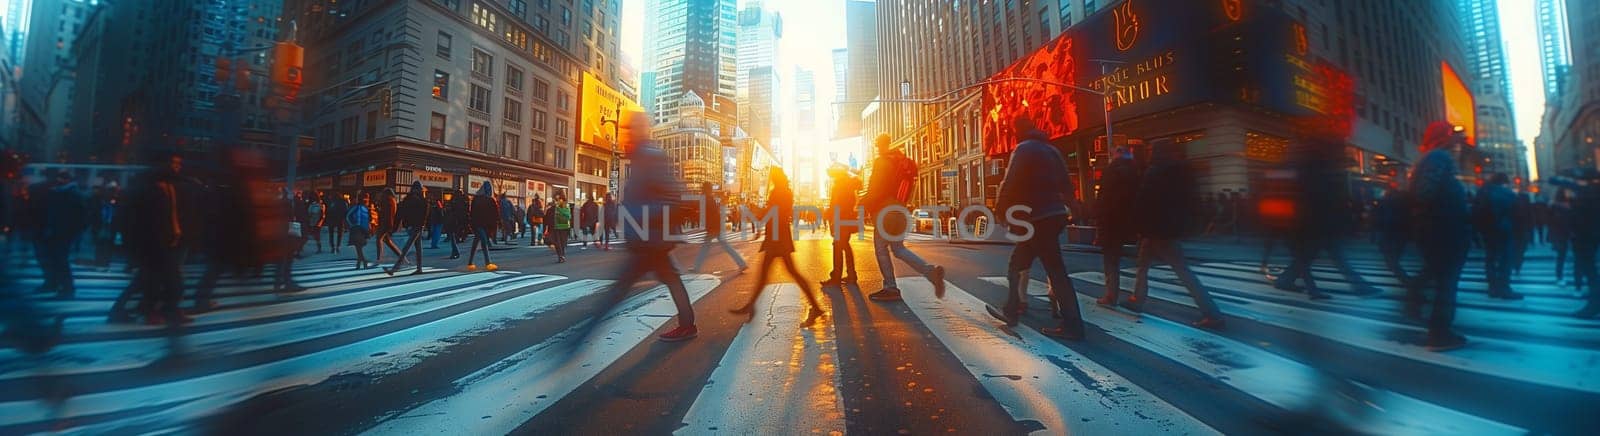 A blurred image captures a crowd of people walking down an electric blue city street at sunset, filled with leisure and travel vibes